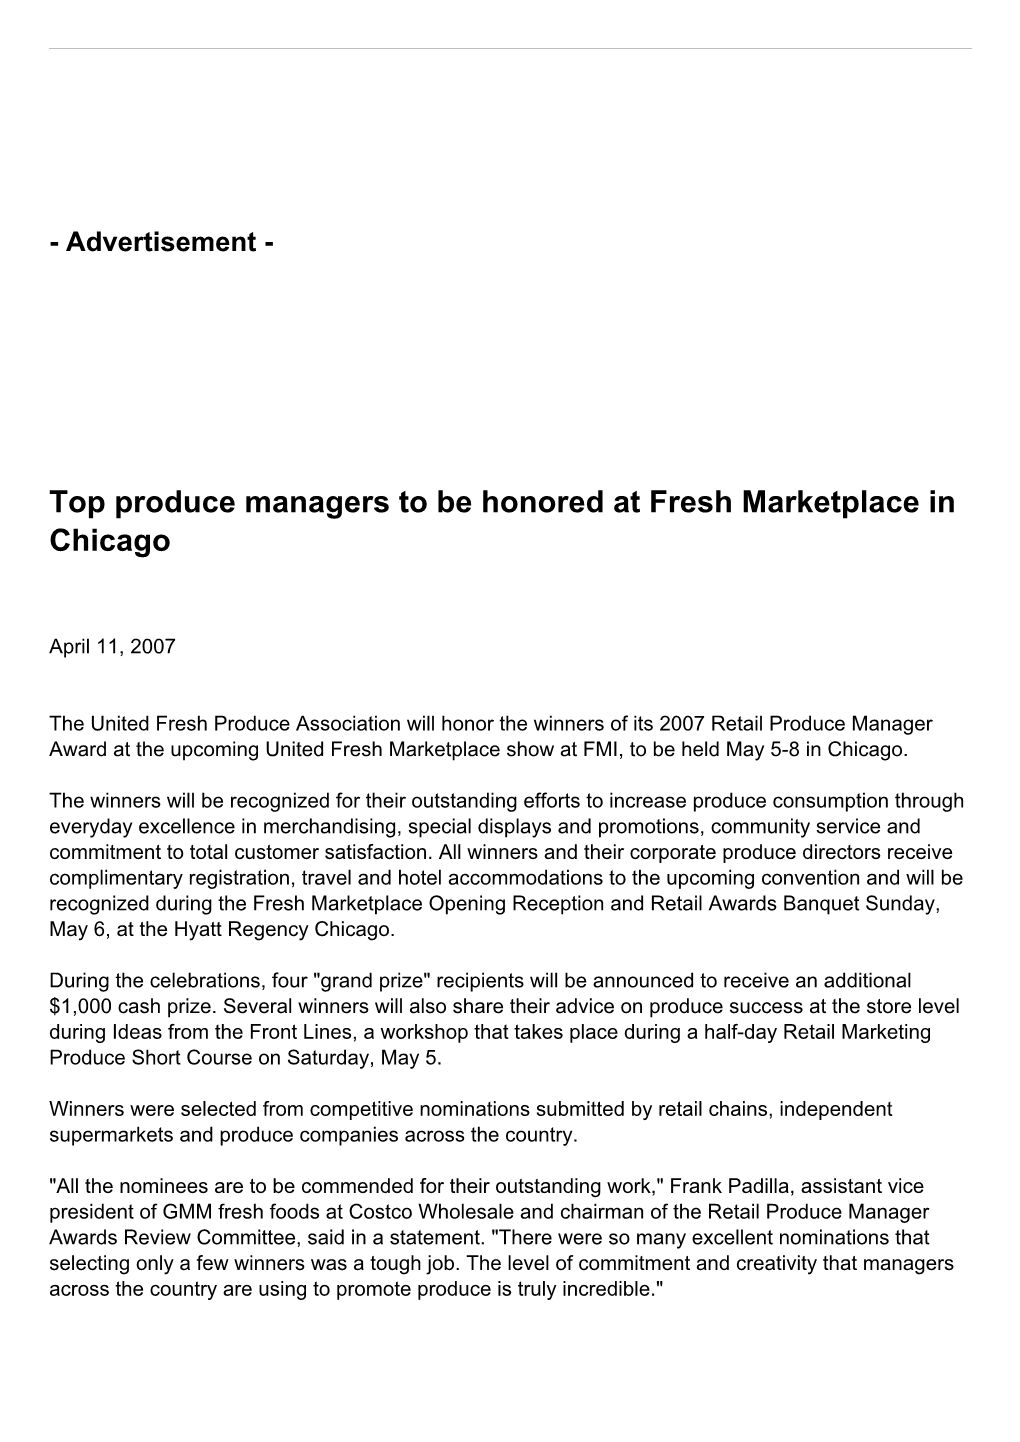 Top Produce Managers to Be Honored at Fresh Marketplace in Chicago